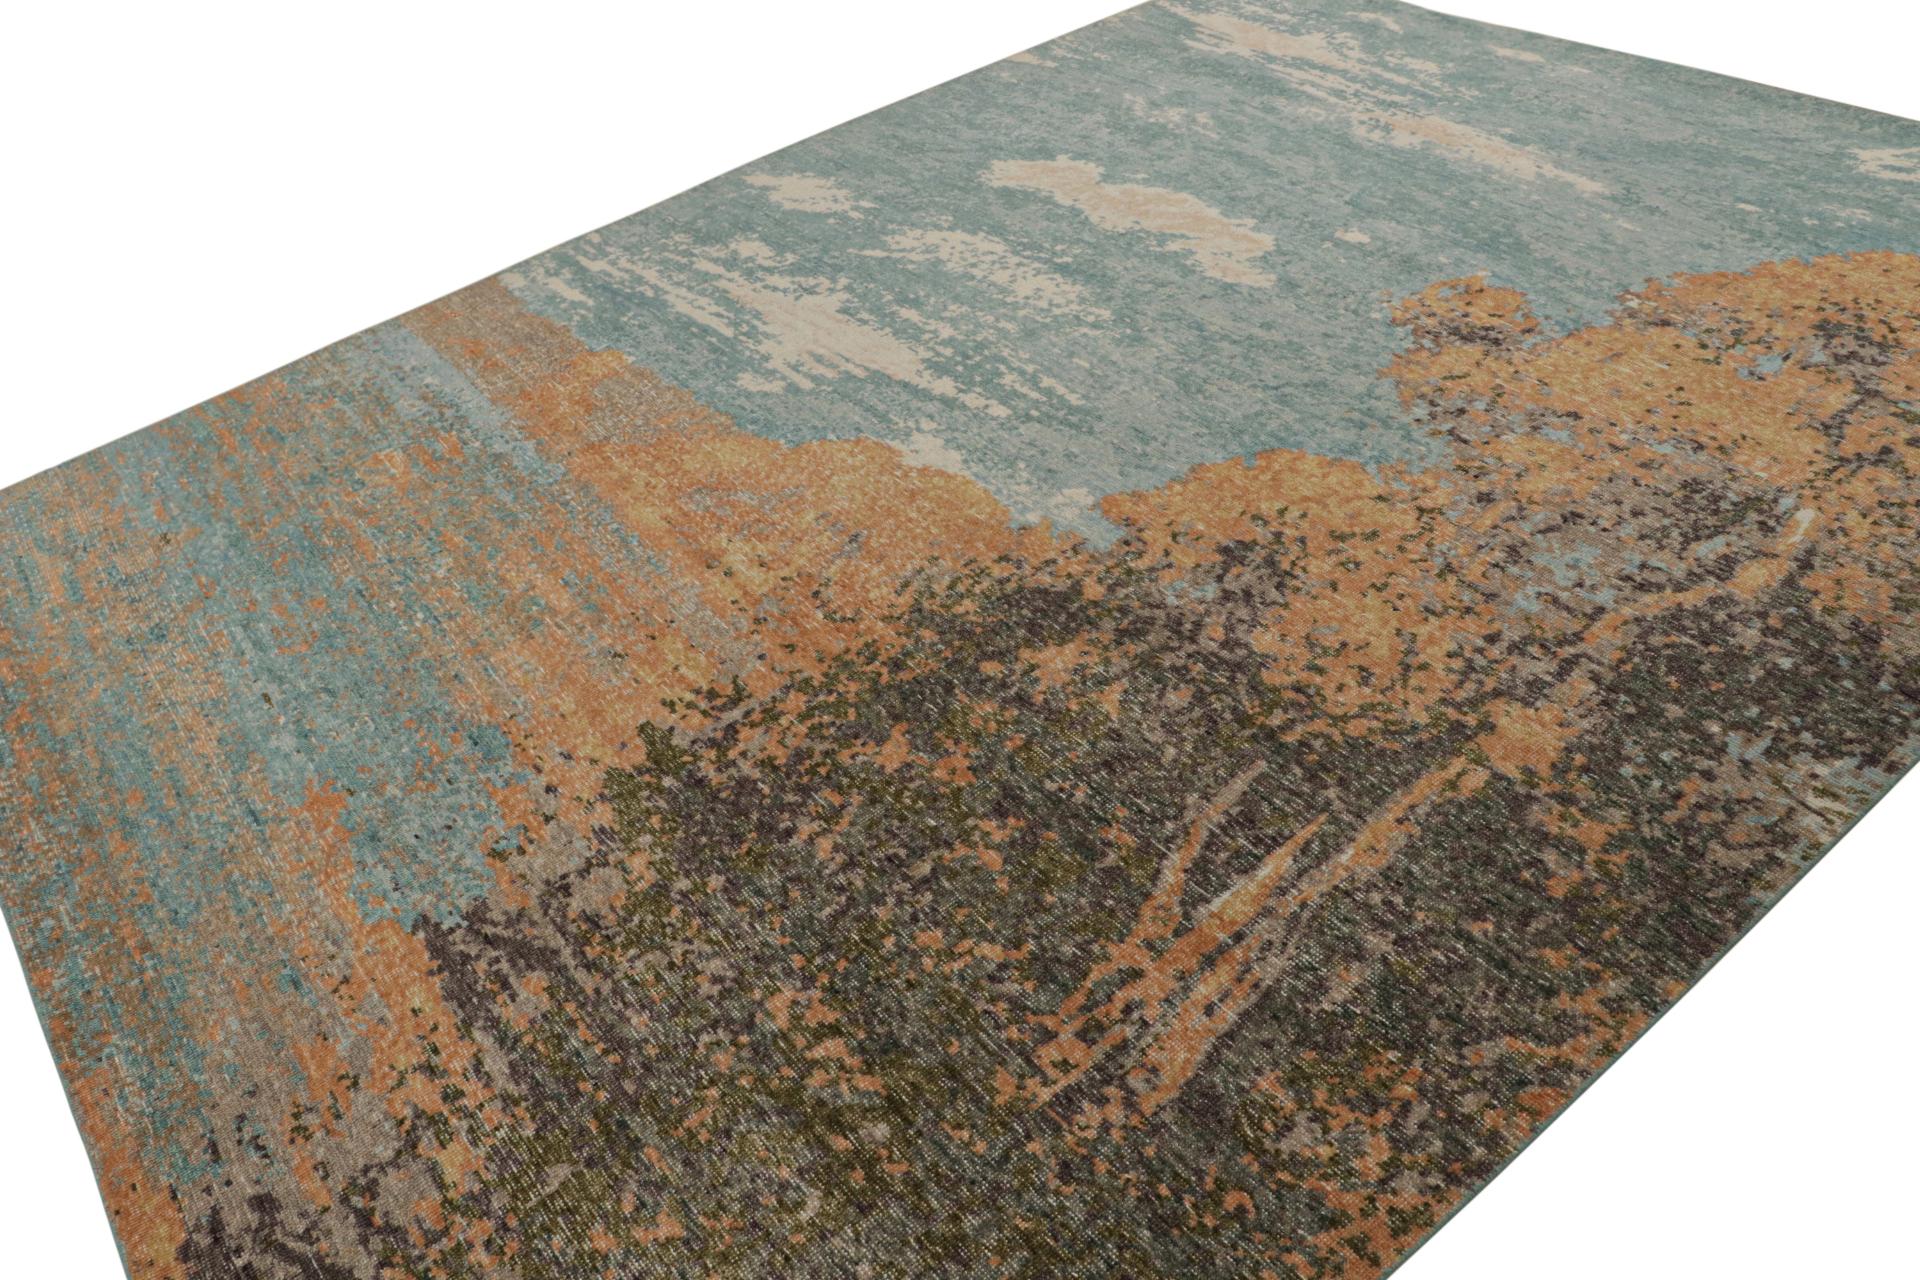 Hand-knotted in wool, this 9x12 modern rug, originating from India, has been inspired by the many provenances to undertake depictions of scenery like this idyllic glimpse of sky and forest beside the water. 

On the Design: 

A new addition to the